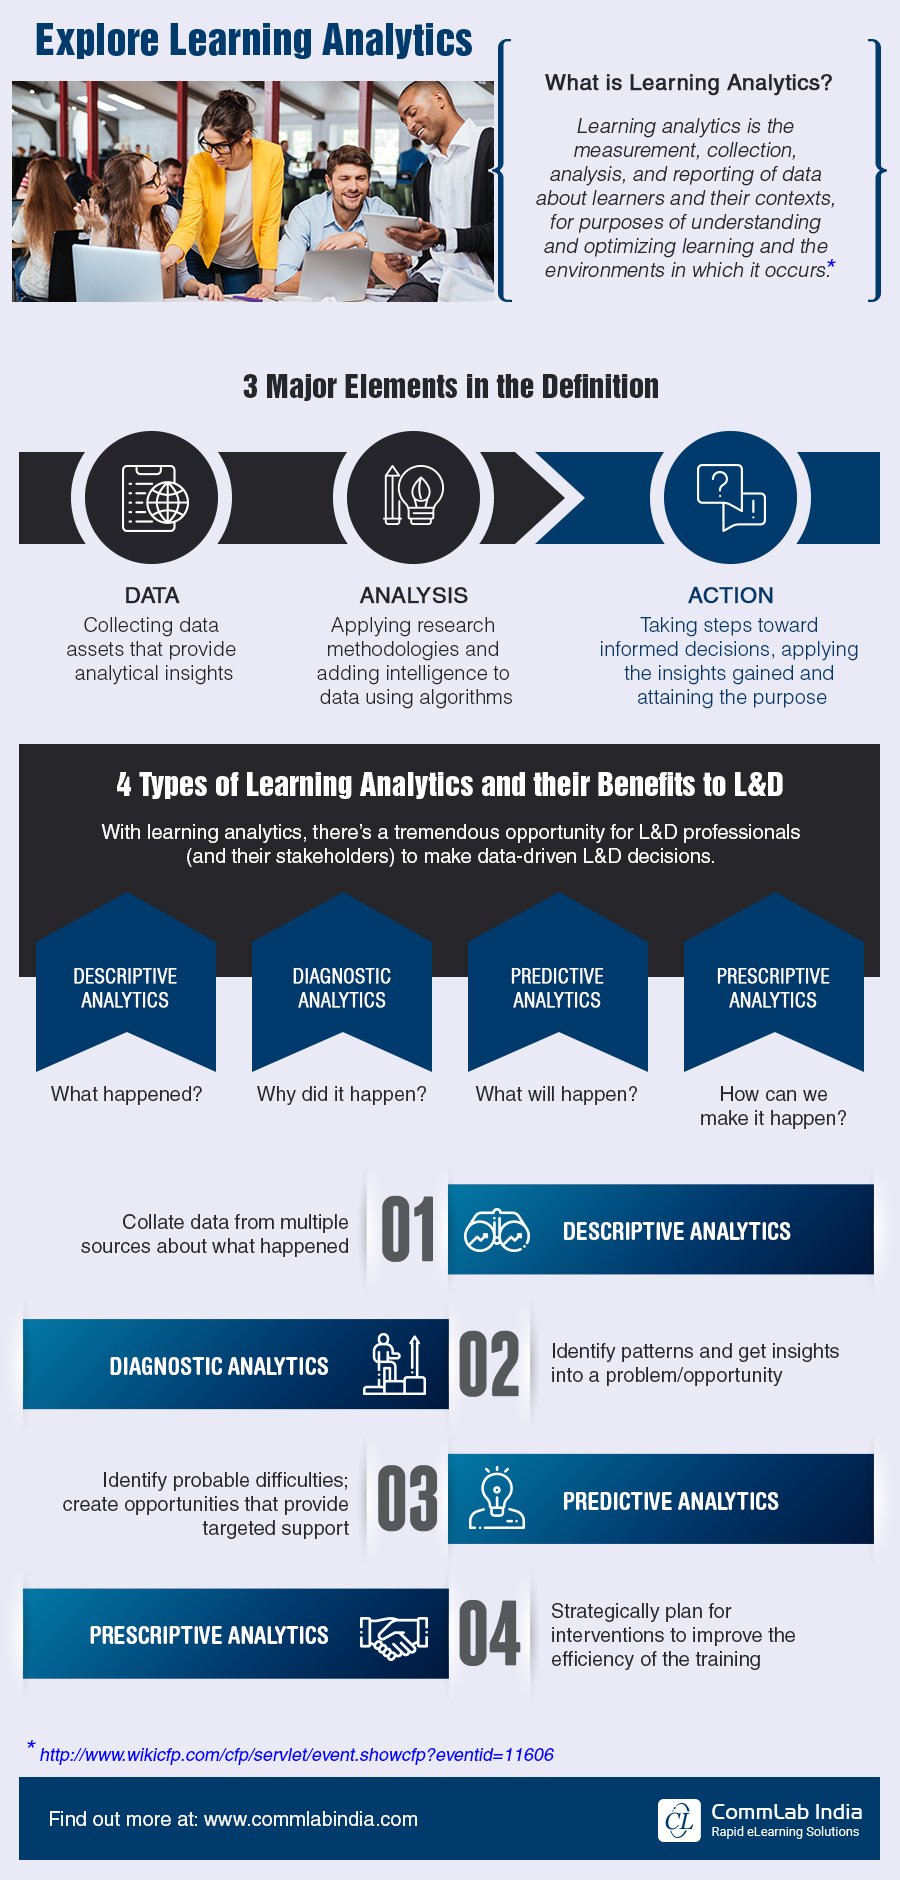 4 Types of Learning Analytics and their Benefits in L&D [Infographic]